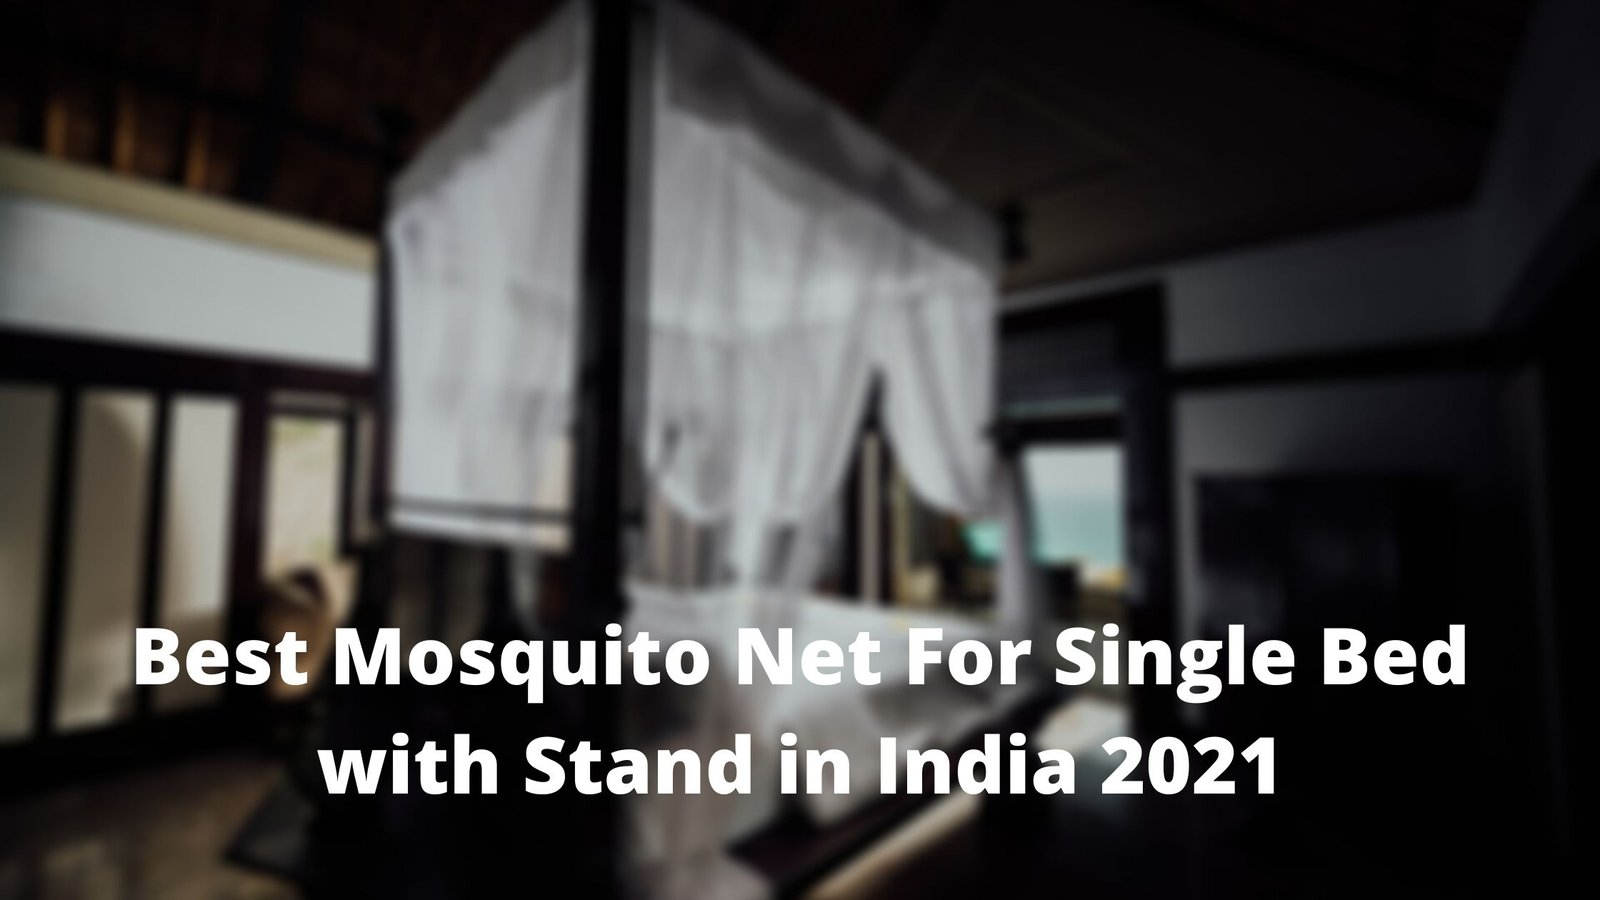 Best Mosquito Net For Single Bed with Stand in India 2021